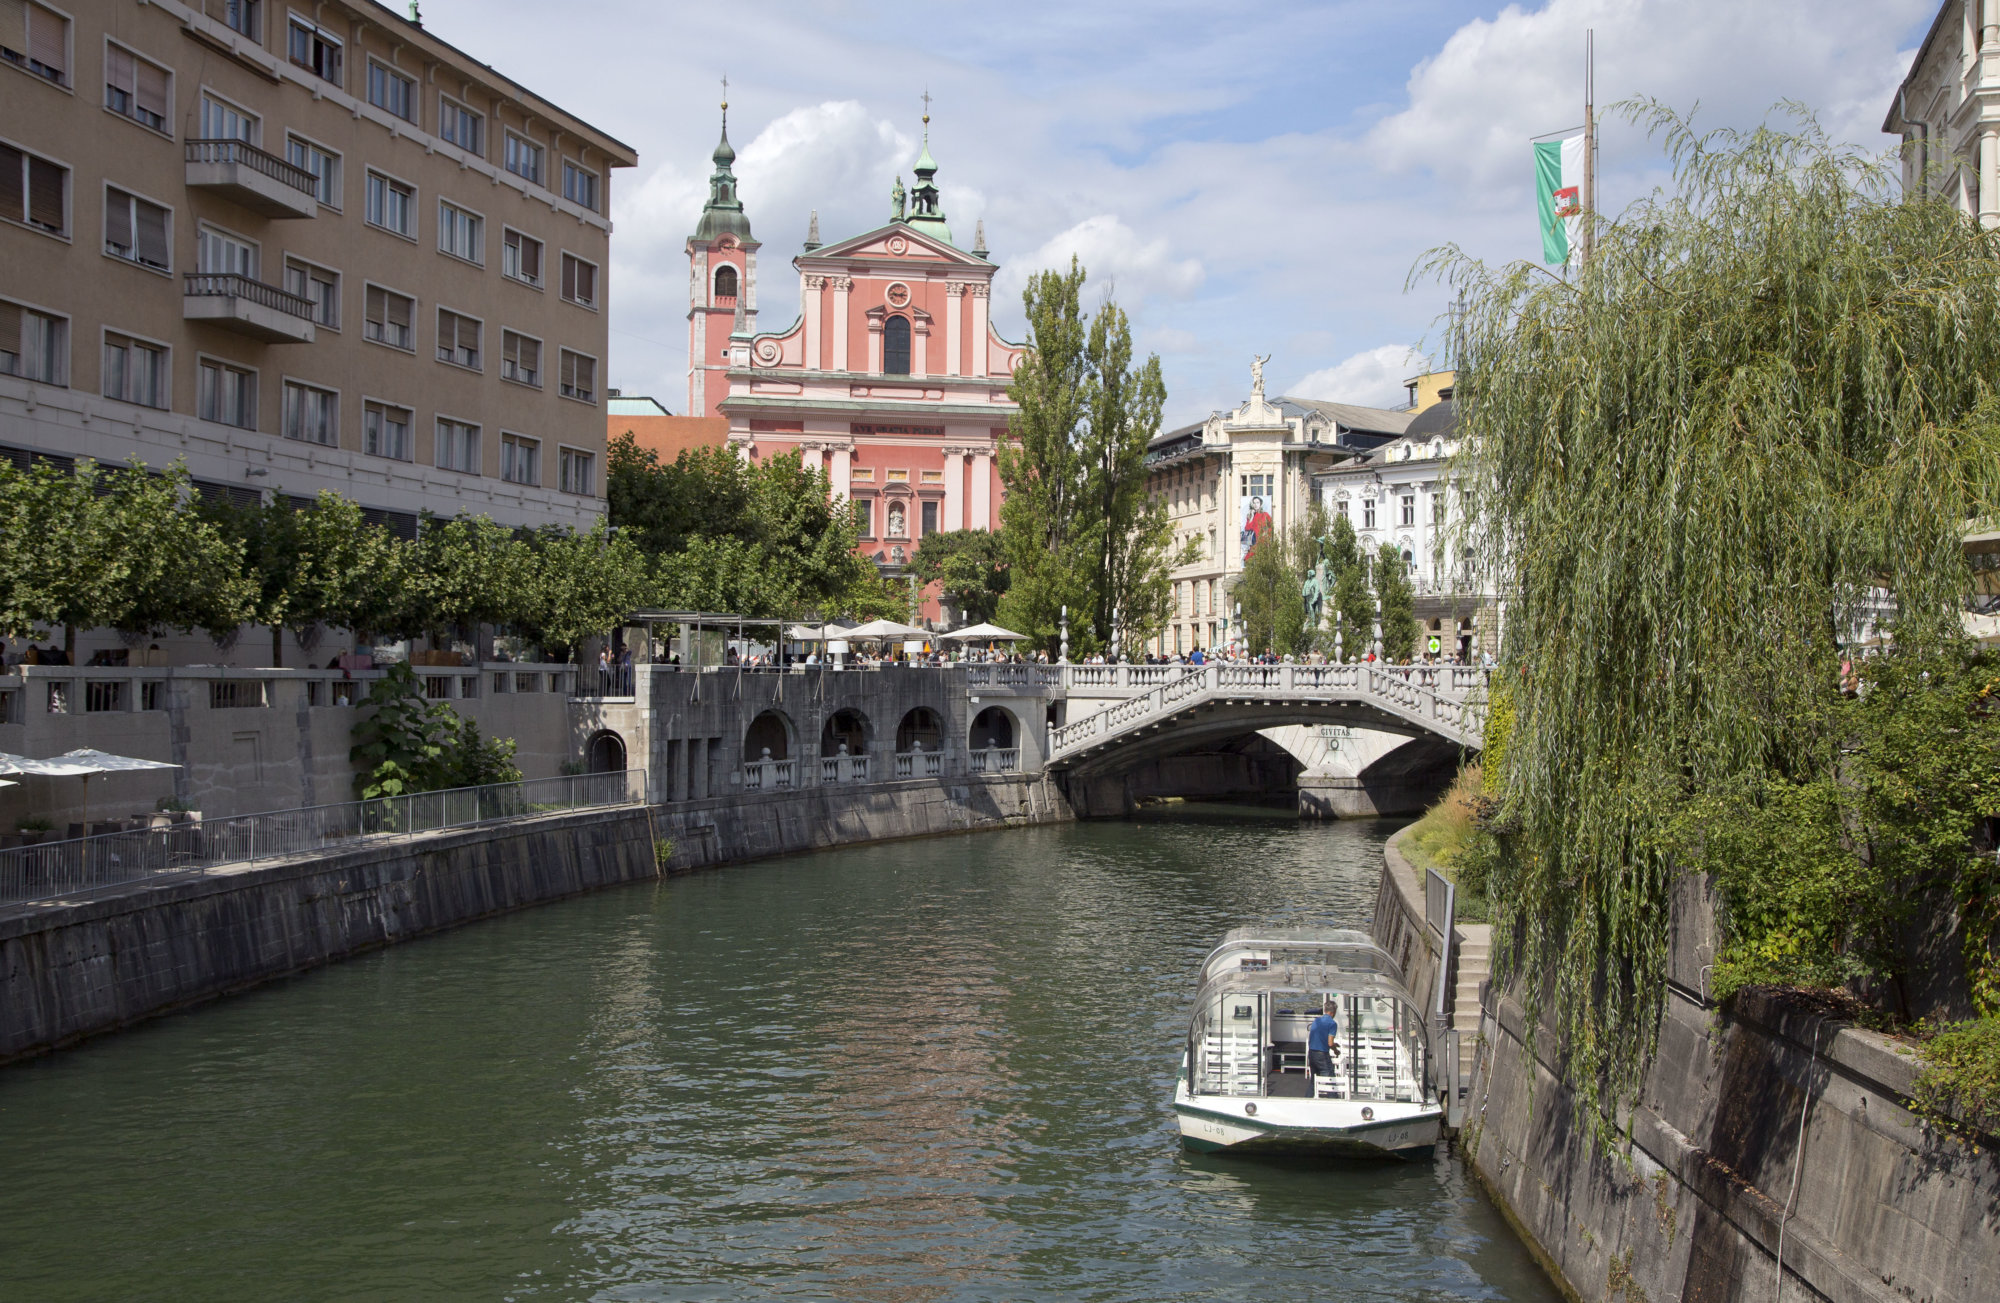 FILE - In this Aug. 12, 2016 file photo, tourists and residents walk across Tromostovje bridge in downtown Ljubljana, Slovenia. The tiny European nation of Slovenia is getting an outsize share of attention lately. Not only has Melania Trump, wife of U.S. President-elect Donald Trump. given her native country a boost of recognition, but Slovenia’s also in the midst of a tourism boom. (AP Photo/Darko Bandic, File)